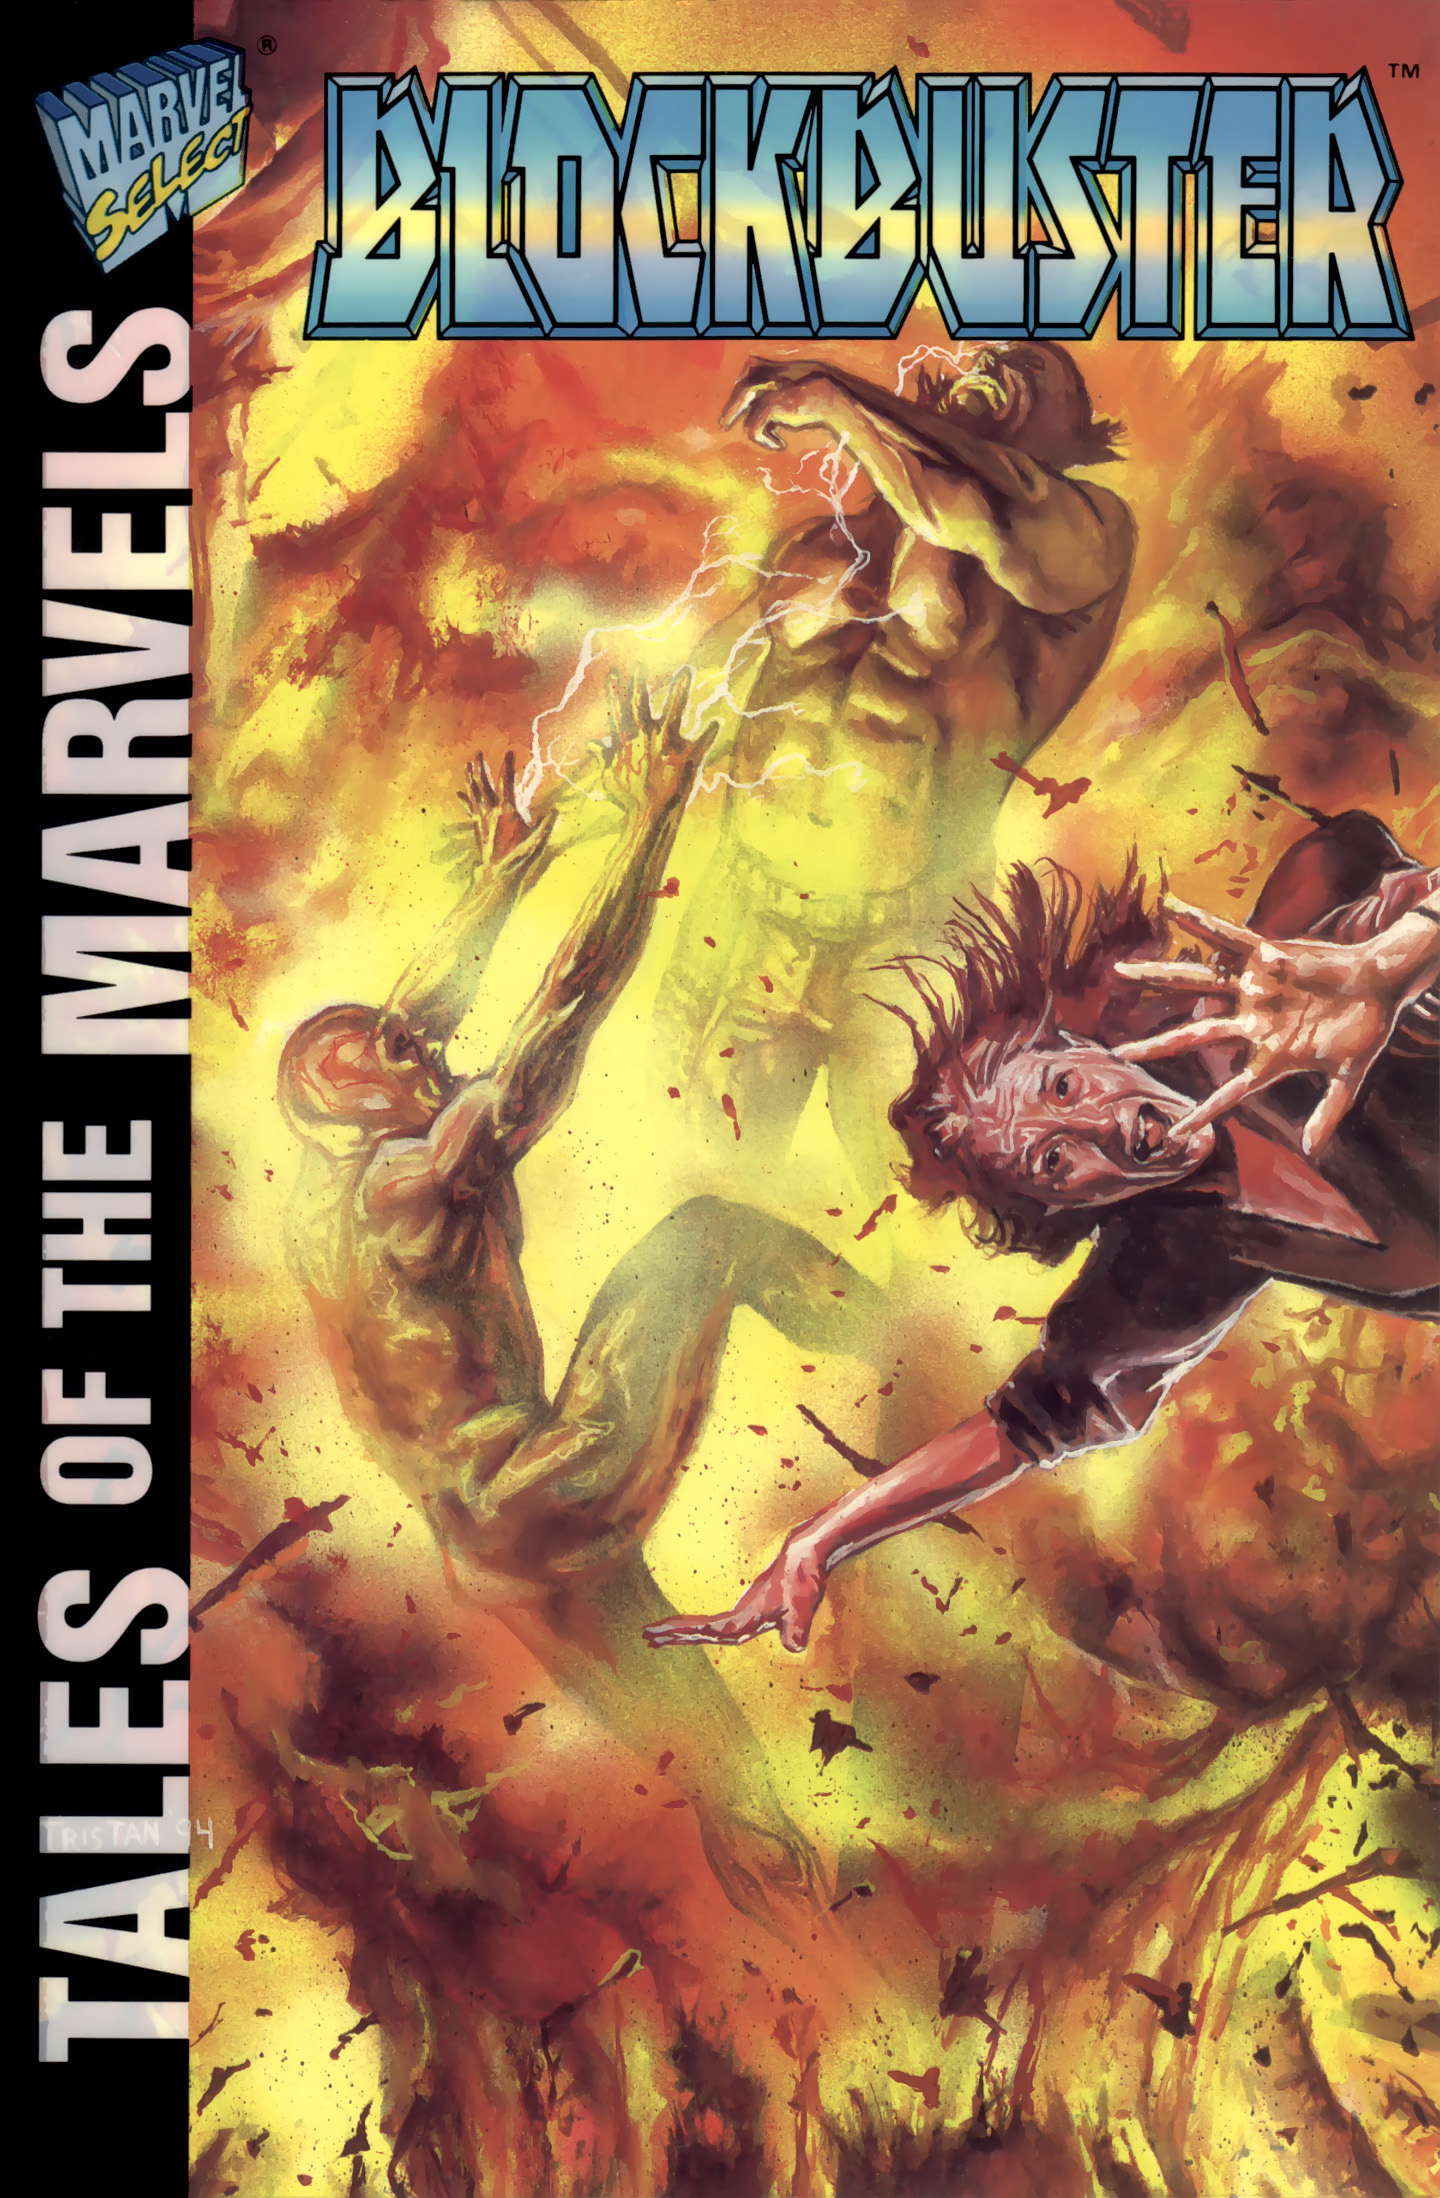 Read online Tales of the Marvels: Blockbuster comic -  Issue # Full - 1